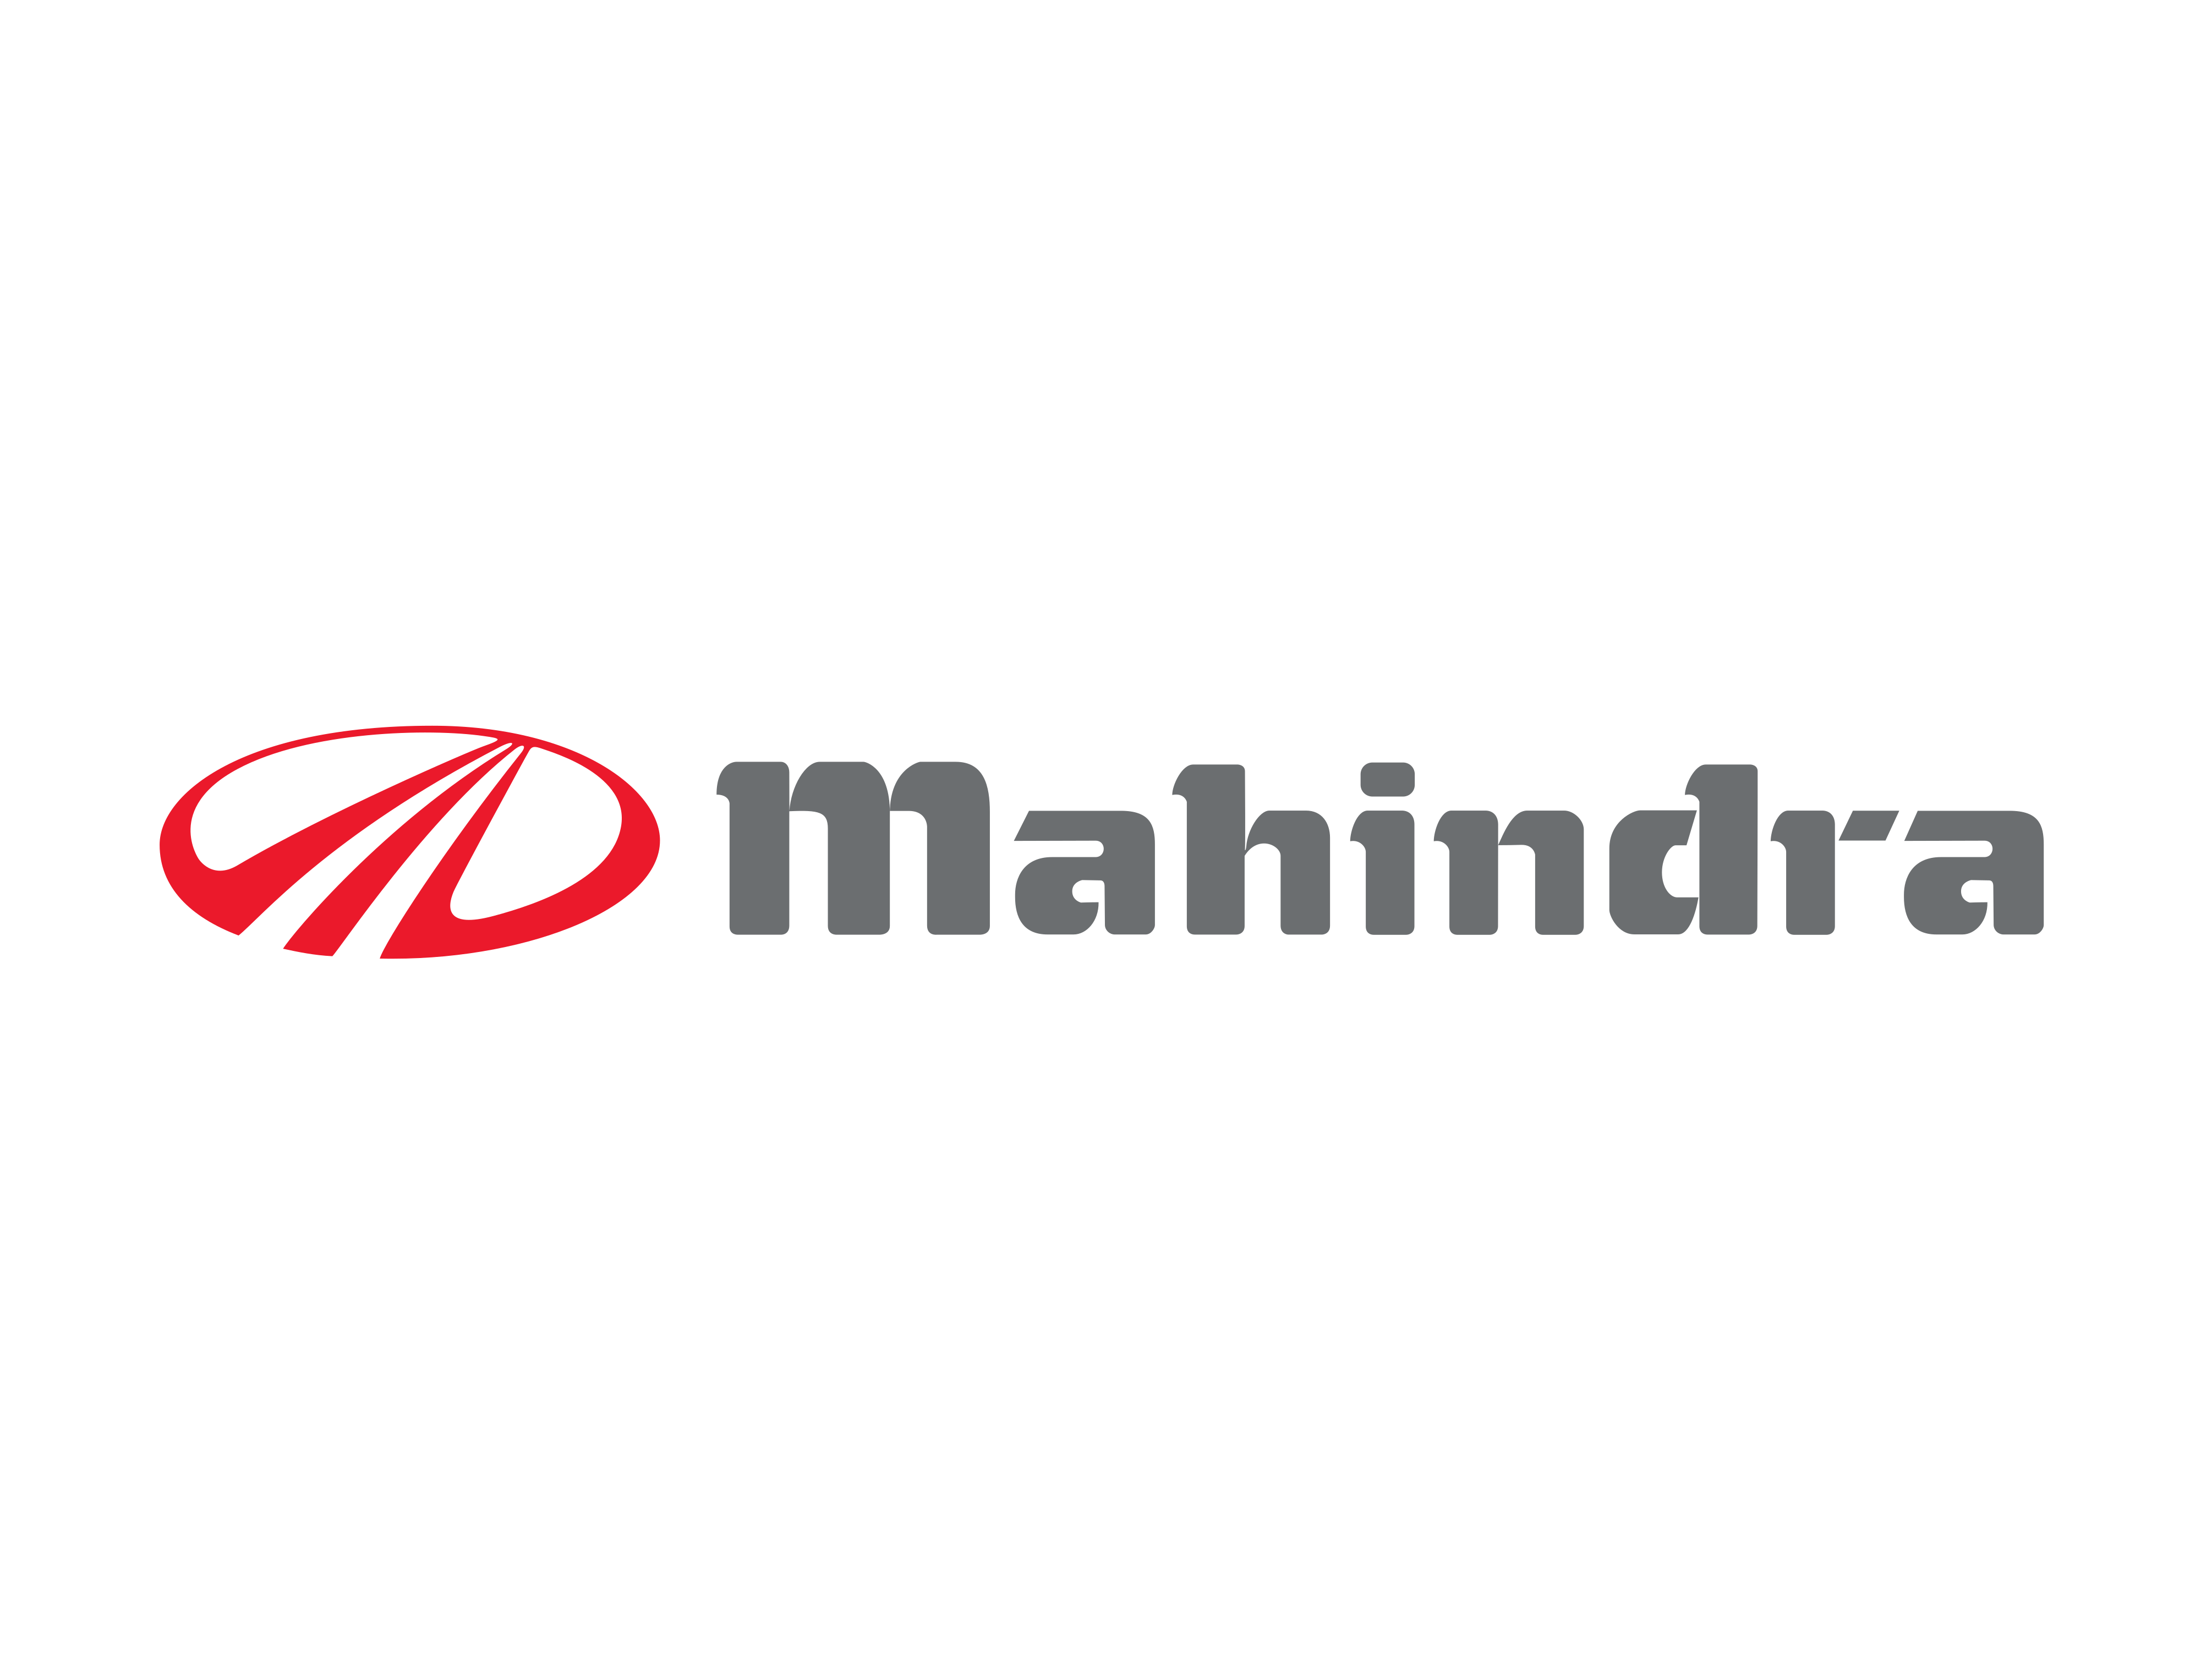 33 Tech Mahindra Images, Stock Photos, 3D objects, & Vectors | Shutterstock